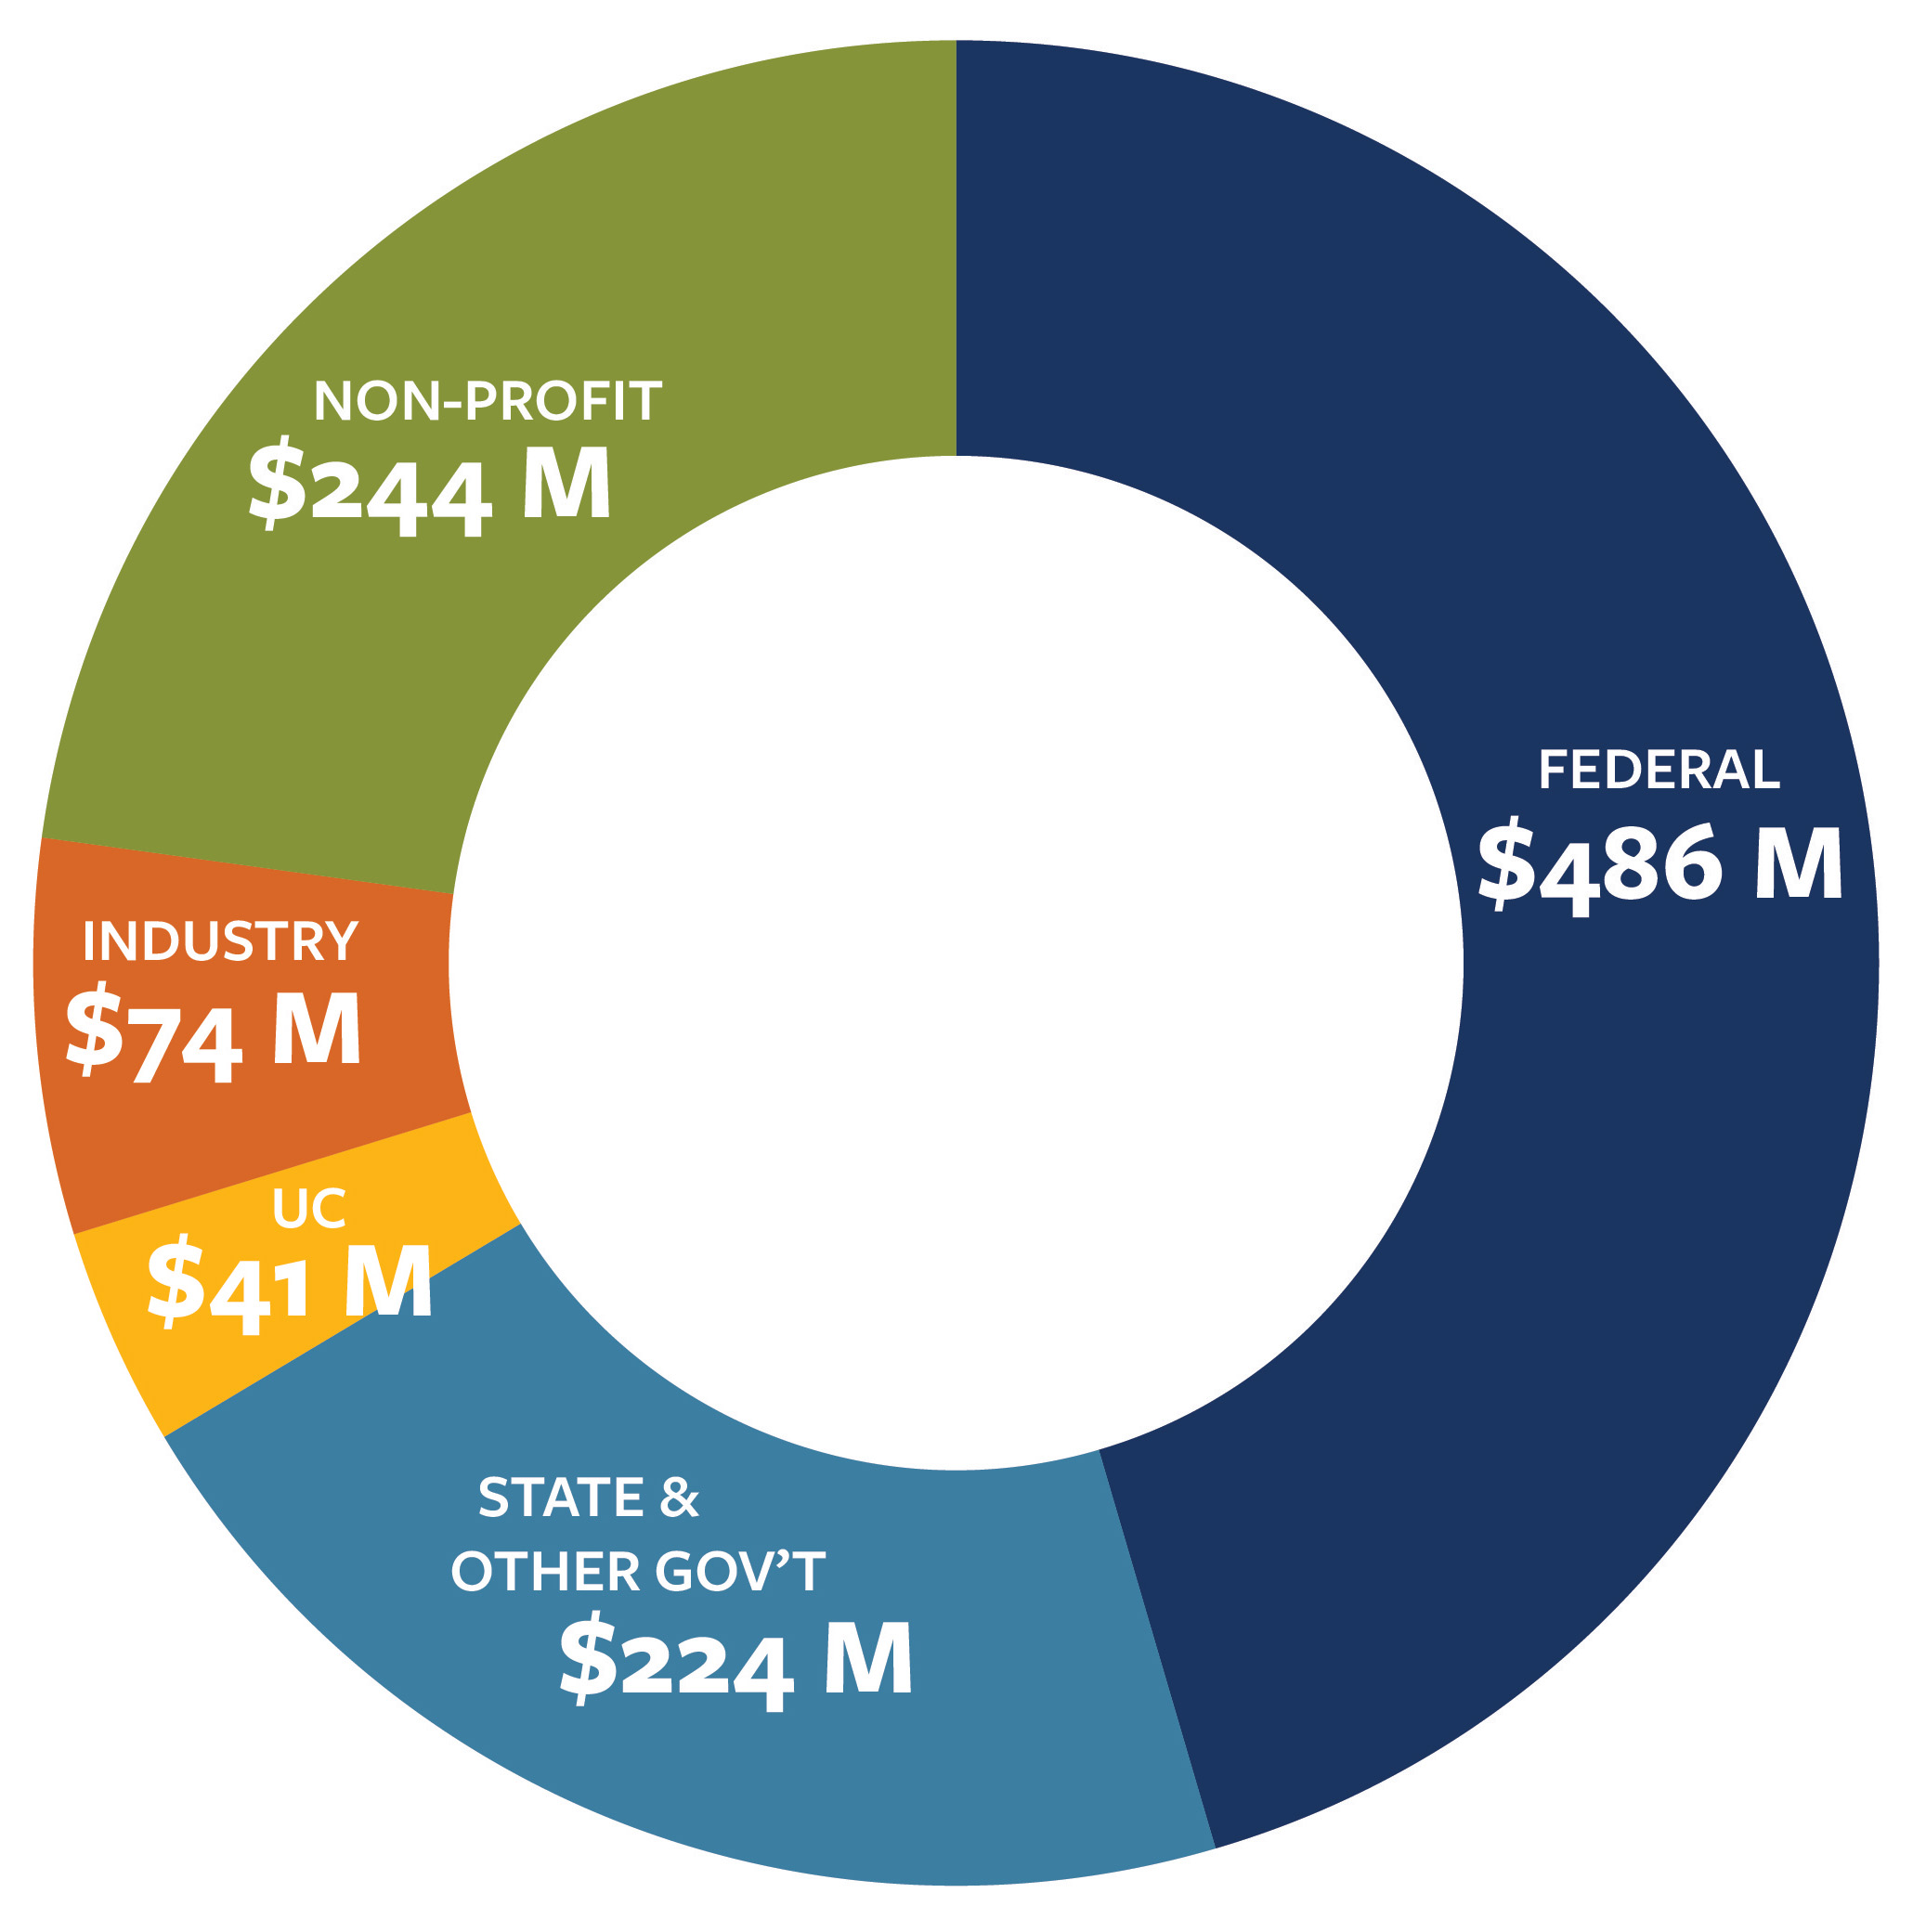 Research fund chart 2023: $486M - Federal; $244M - Non-profit; $224M - State & Other gov't; $74M - Industry;  $41M - UC